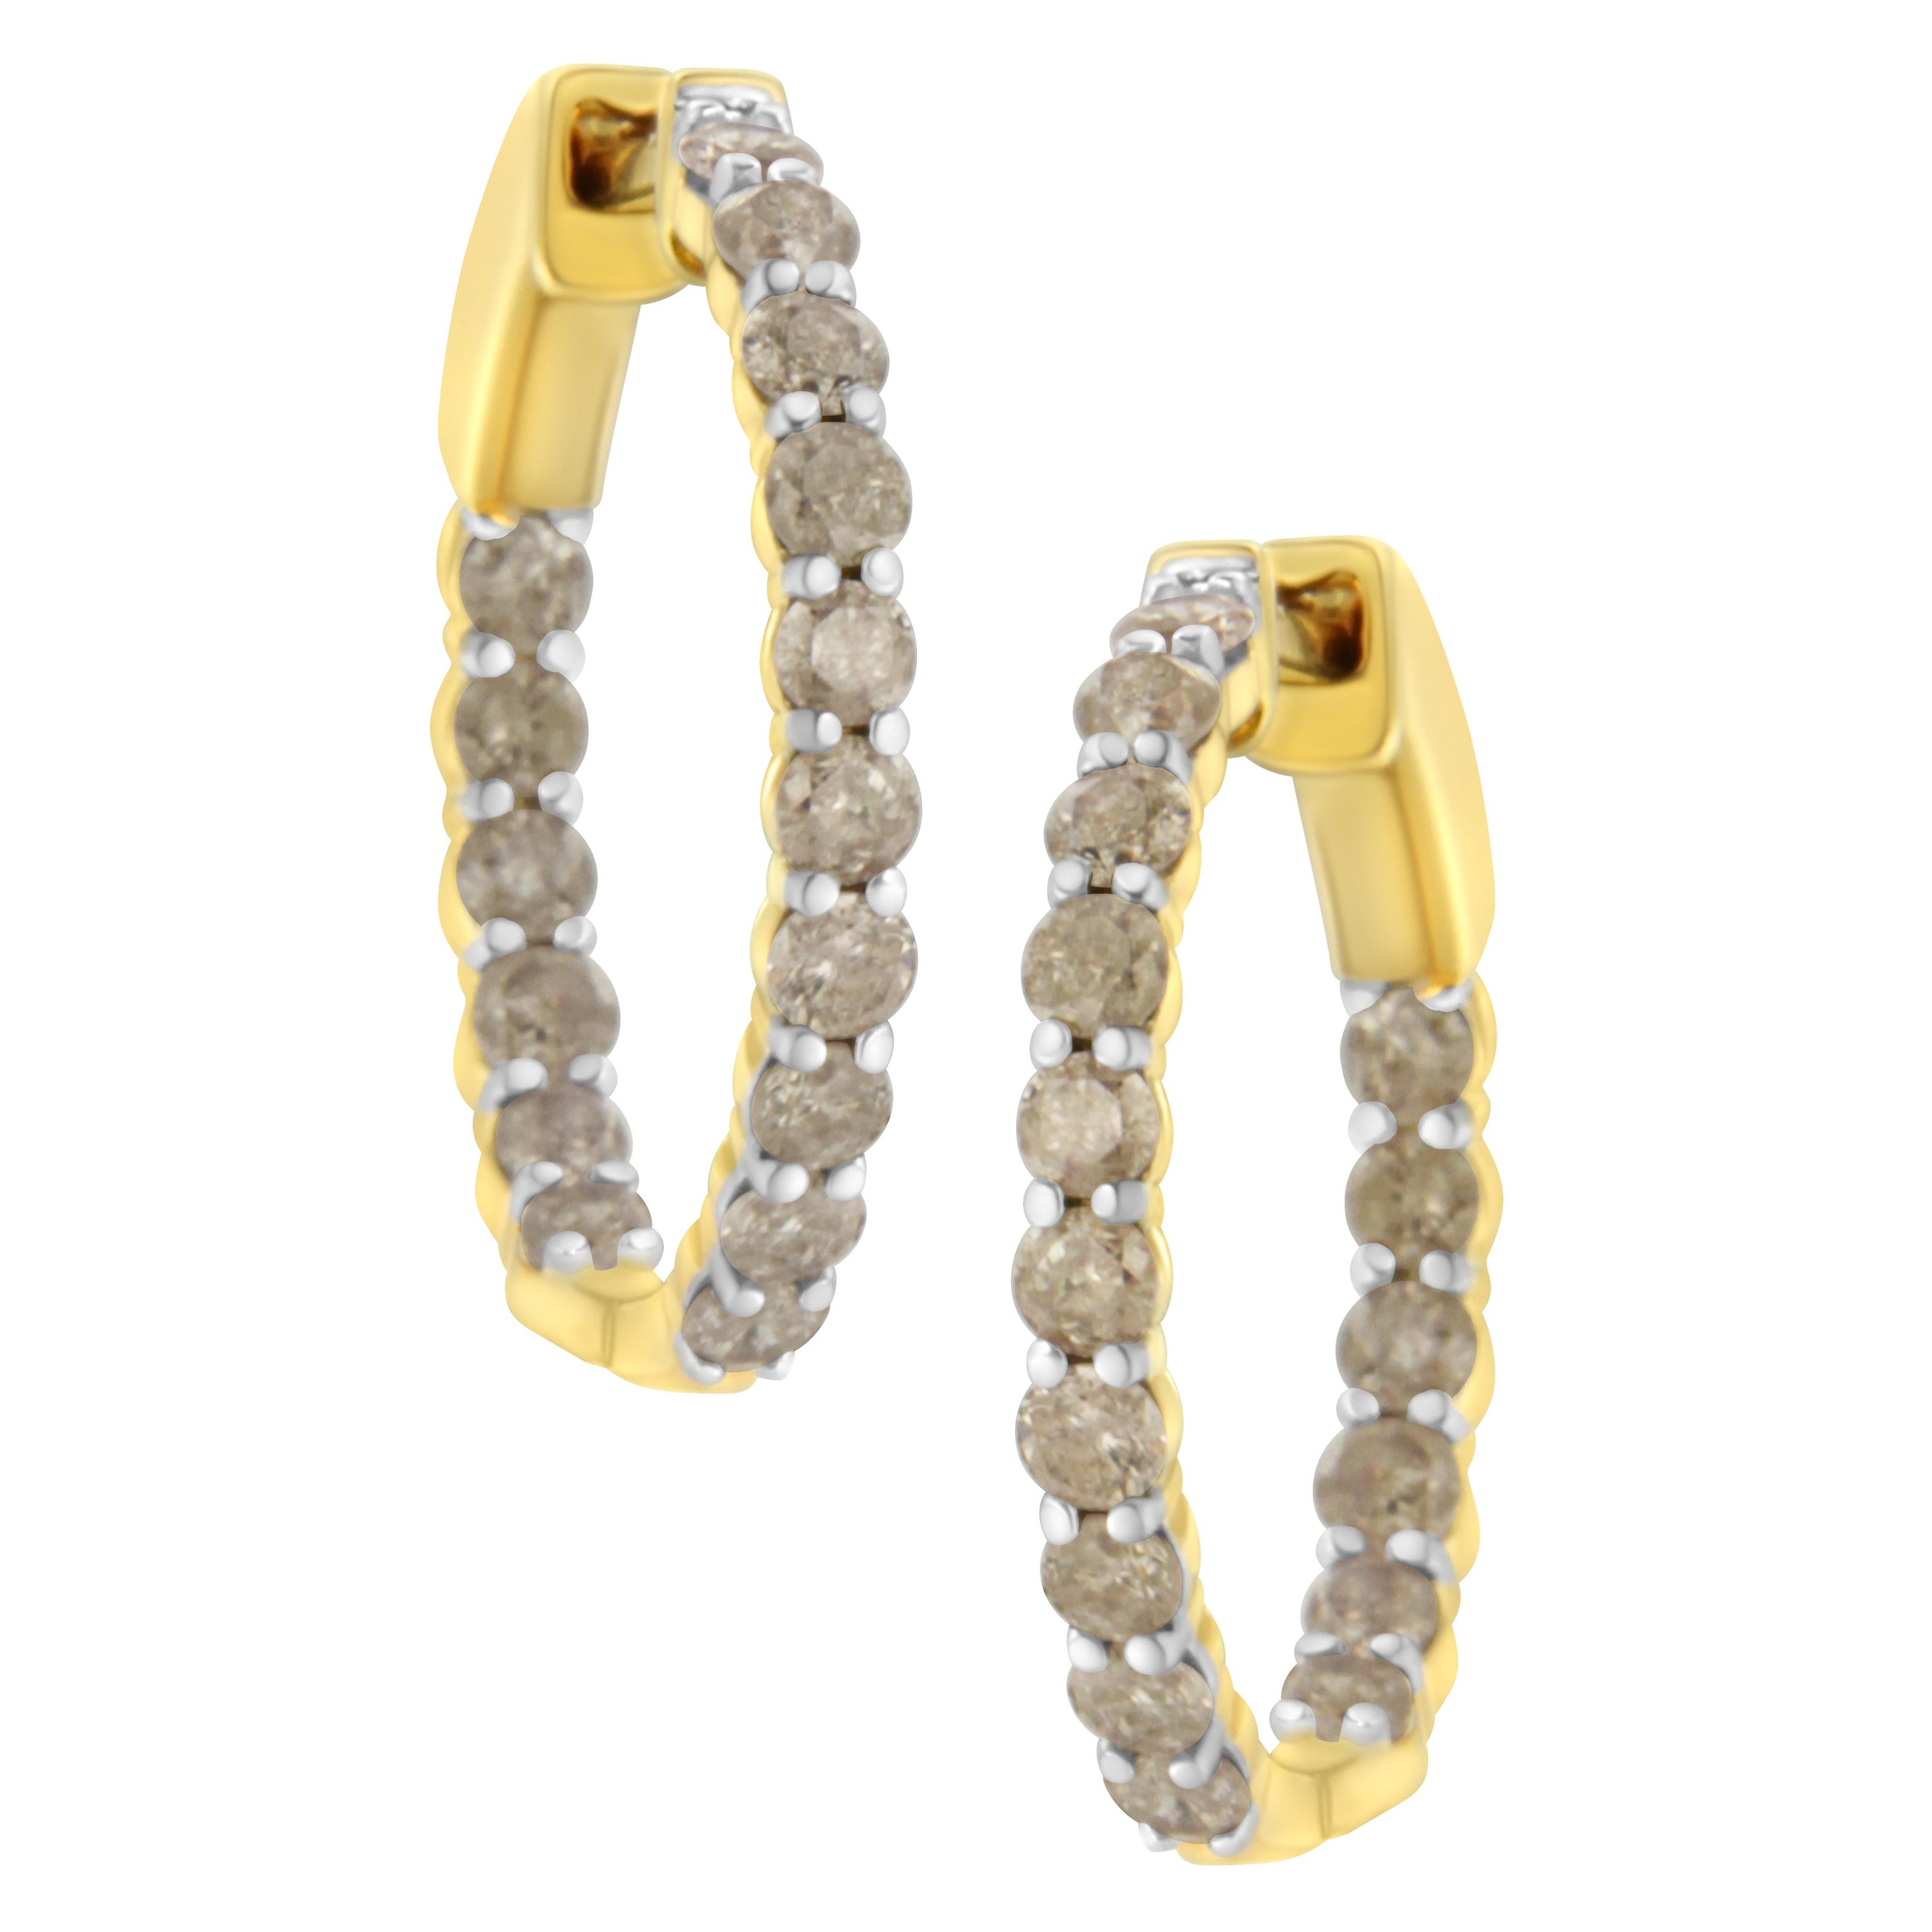 10K Yellow Gold Plated .925 Sterling Silver 2.0 Carat Diamond Hoop Earrings For Sale